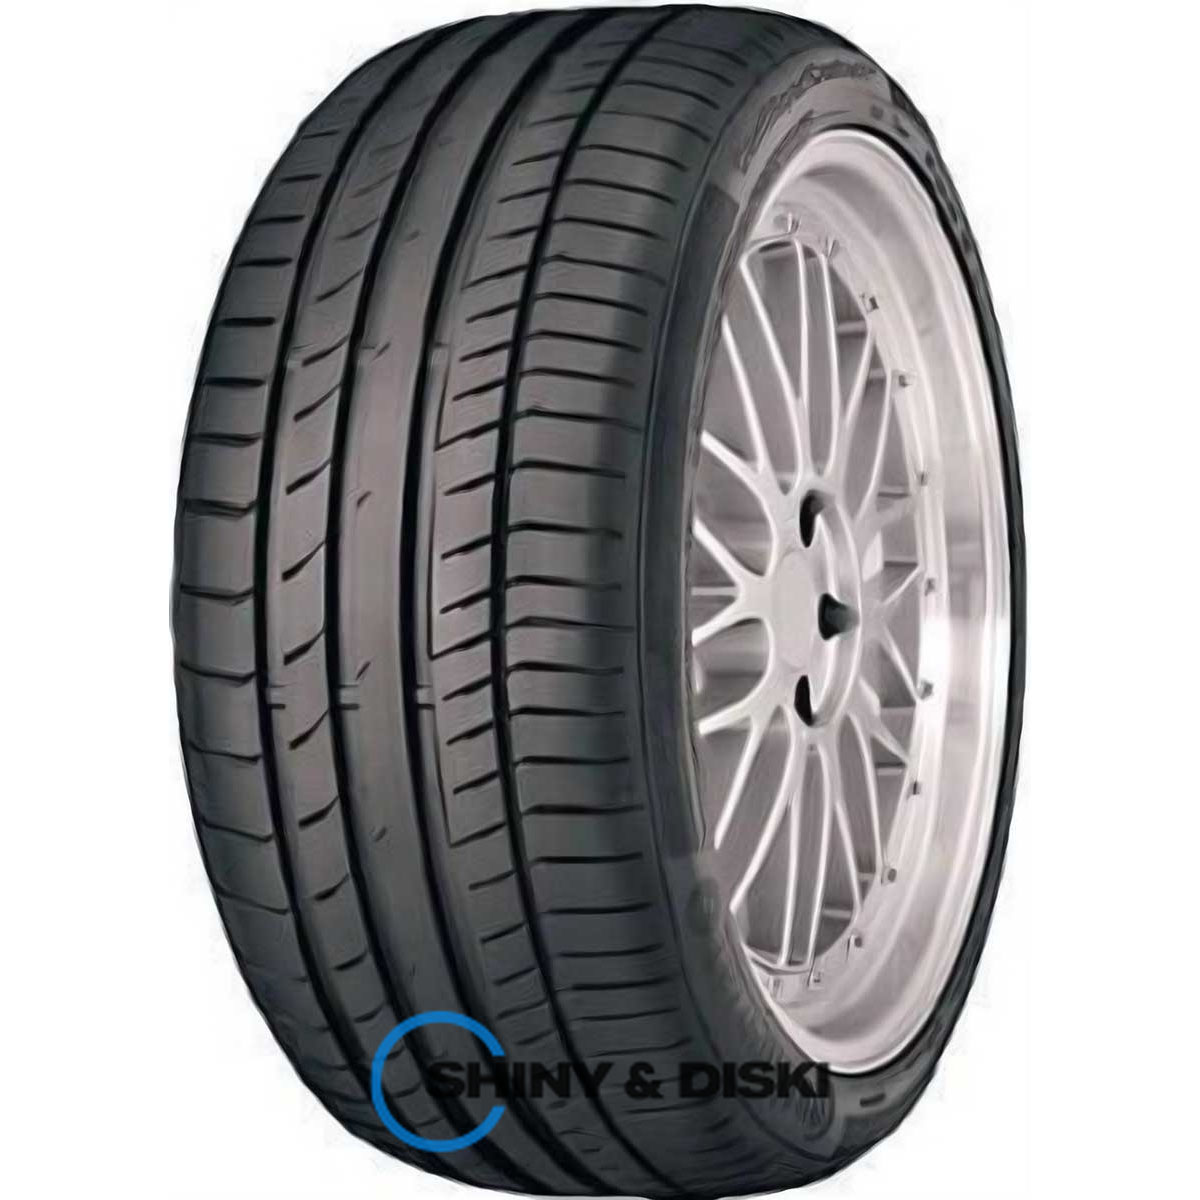 continental sportcontact 5p 315/40 r21 111y mo